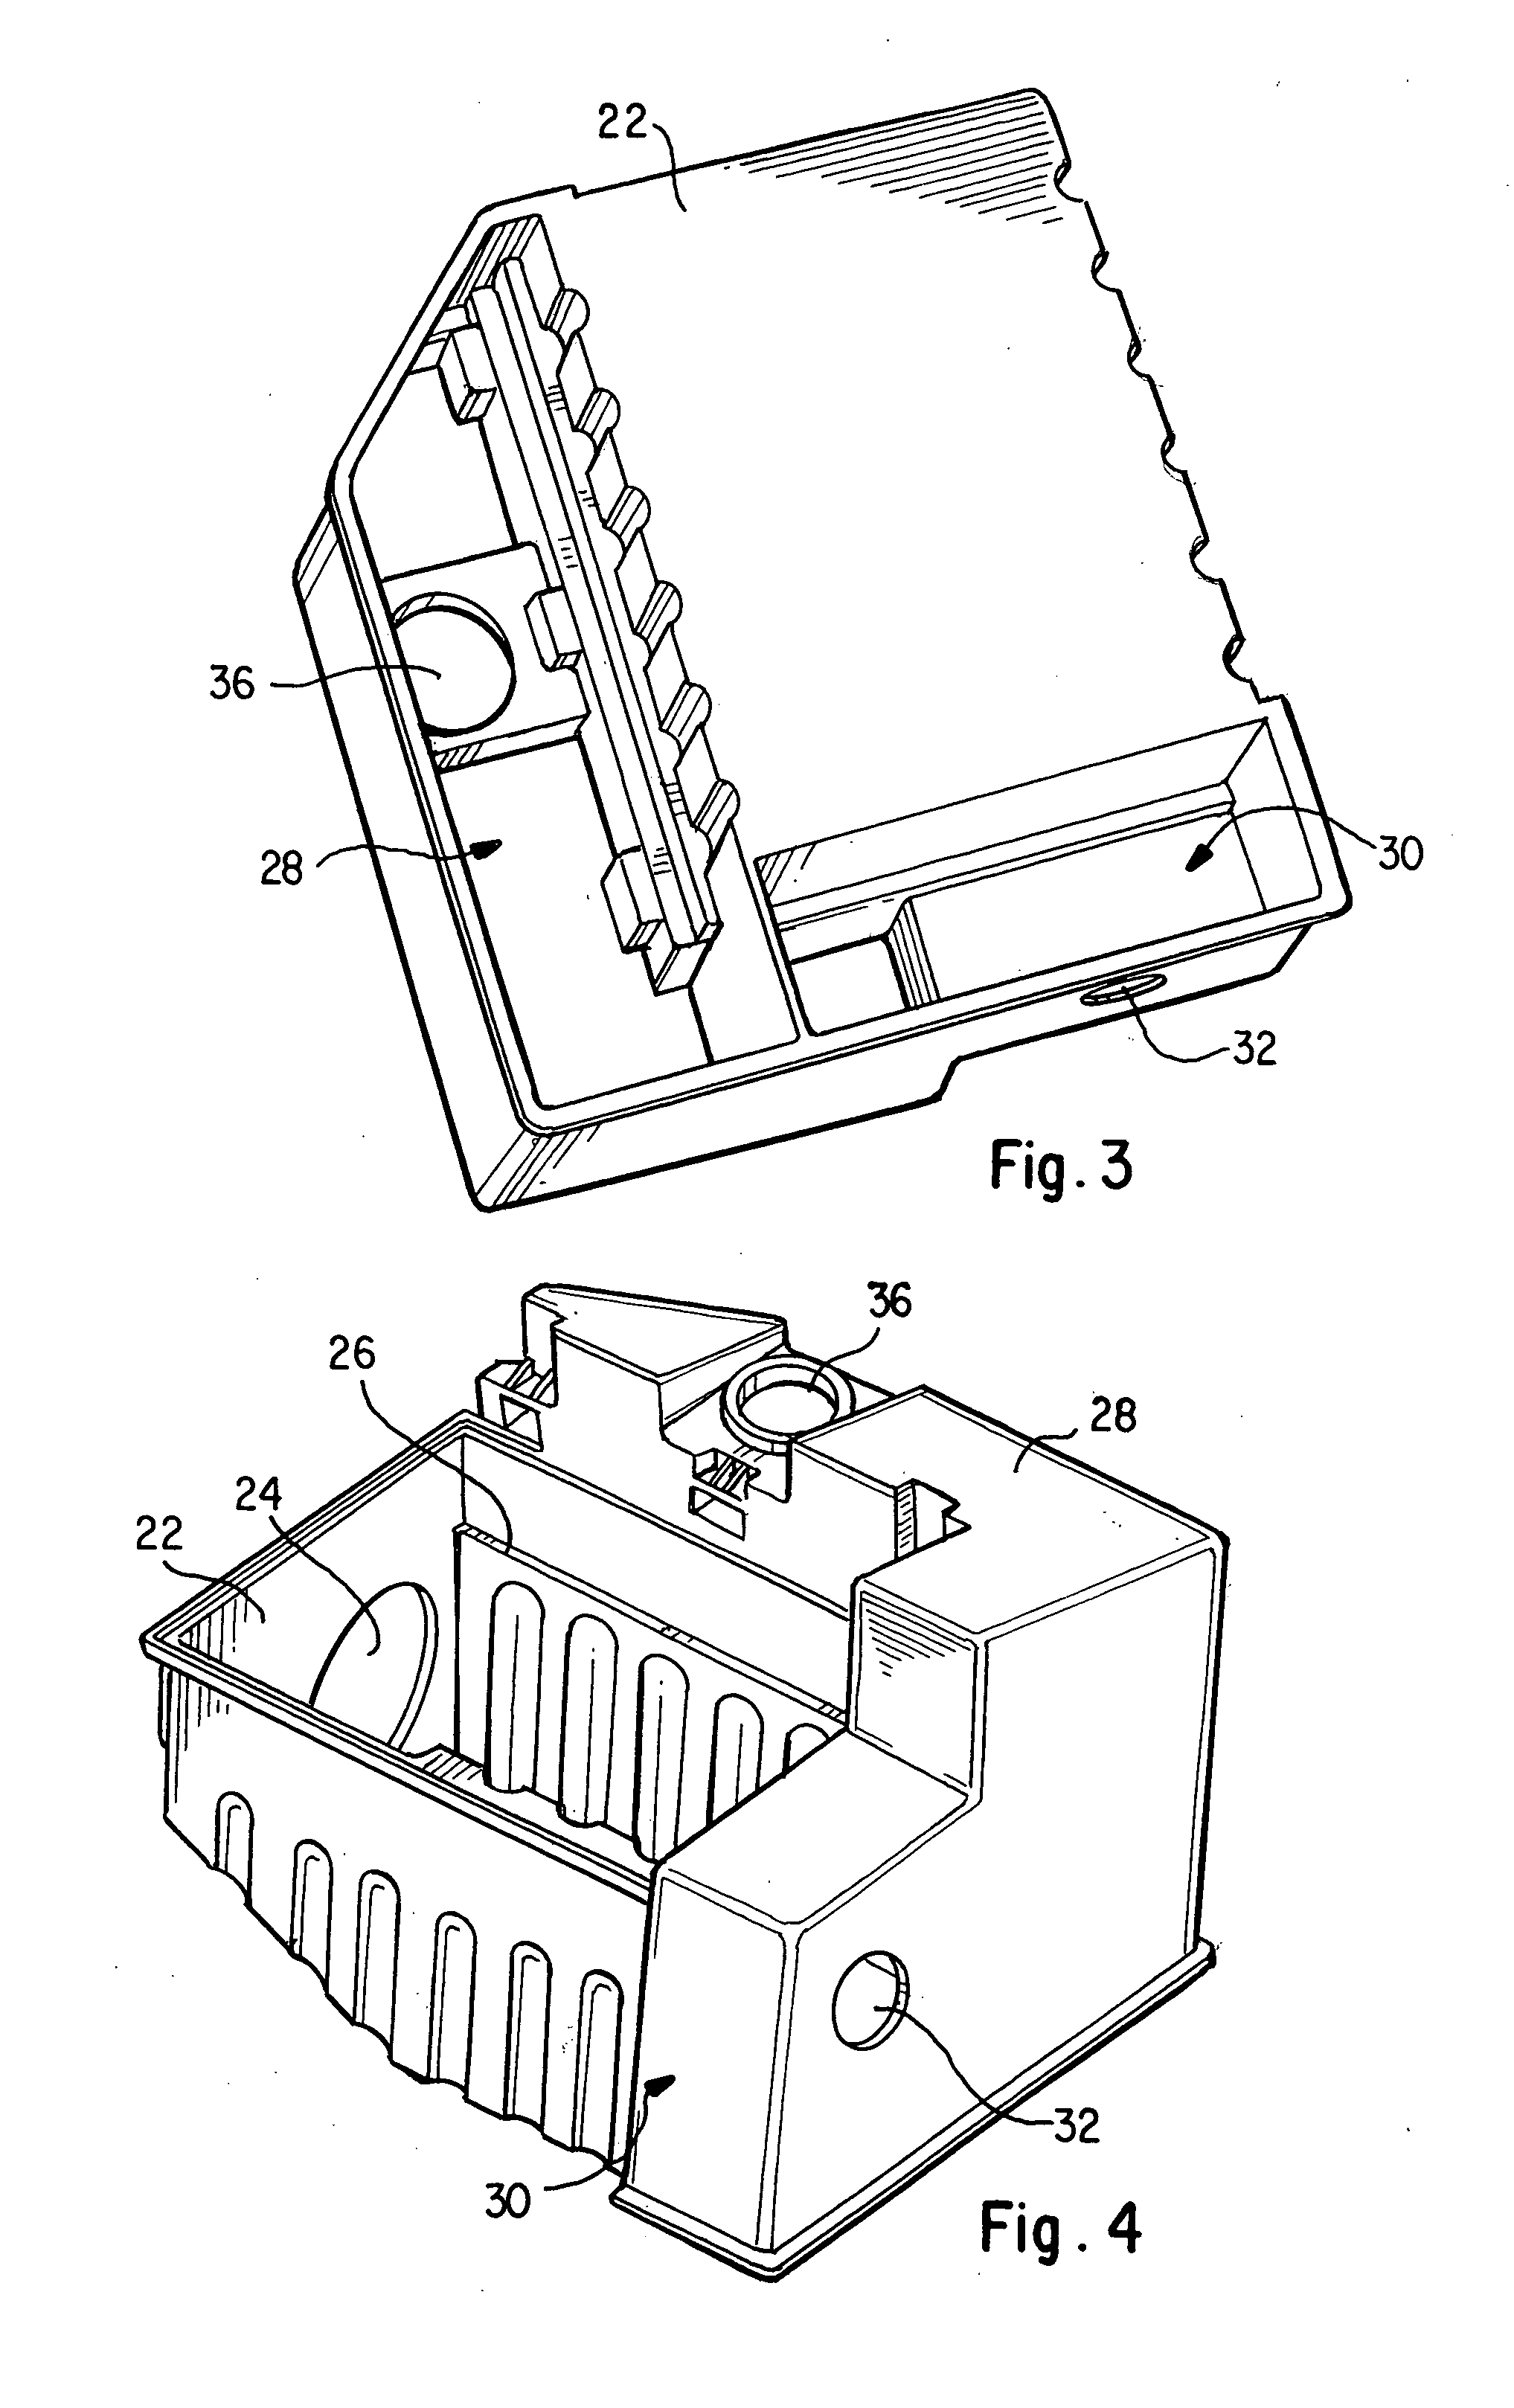 Filter box with resonator and reservoir